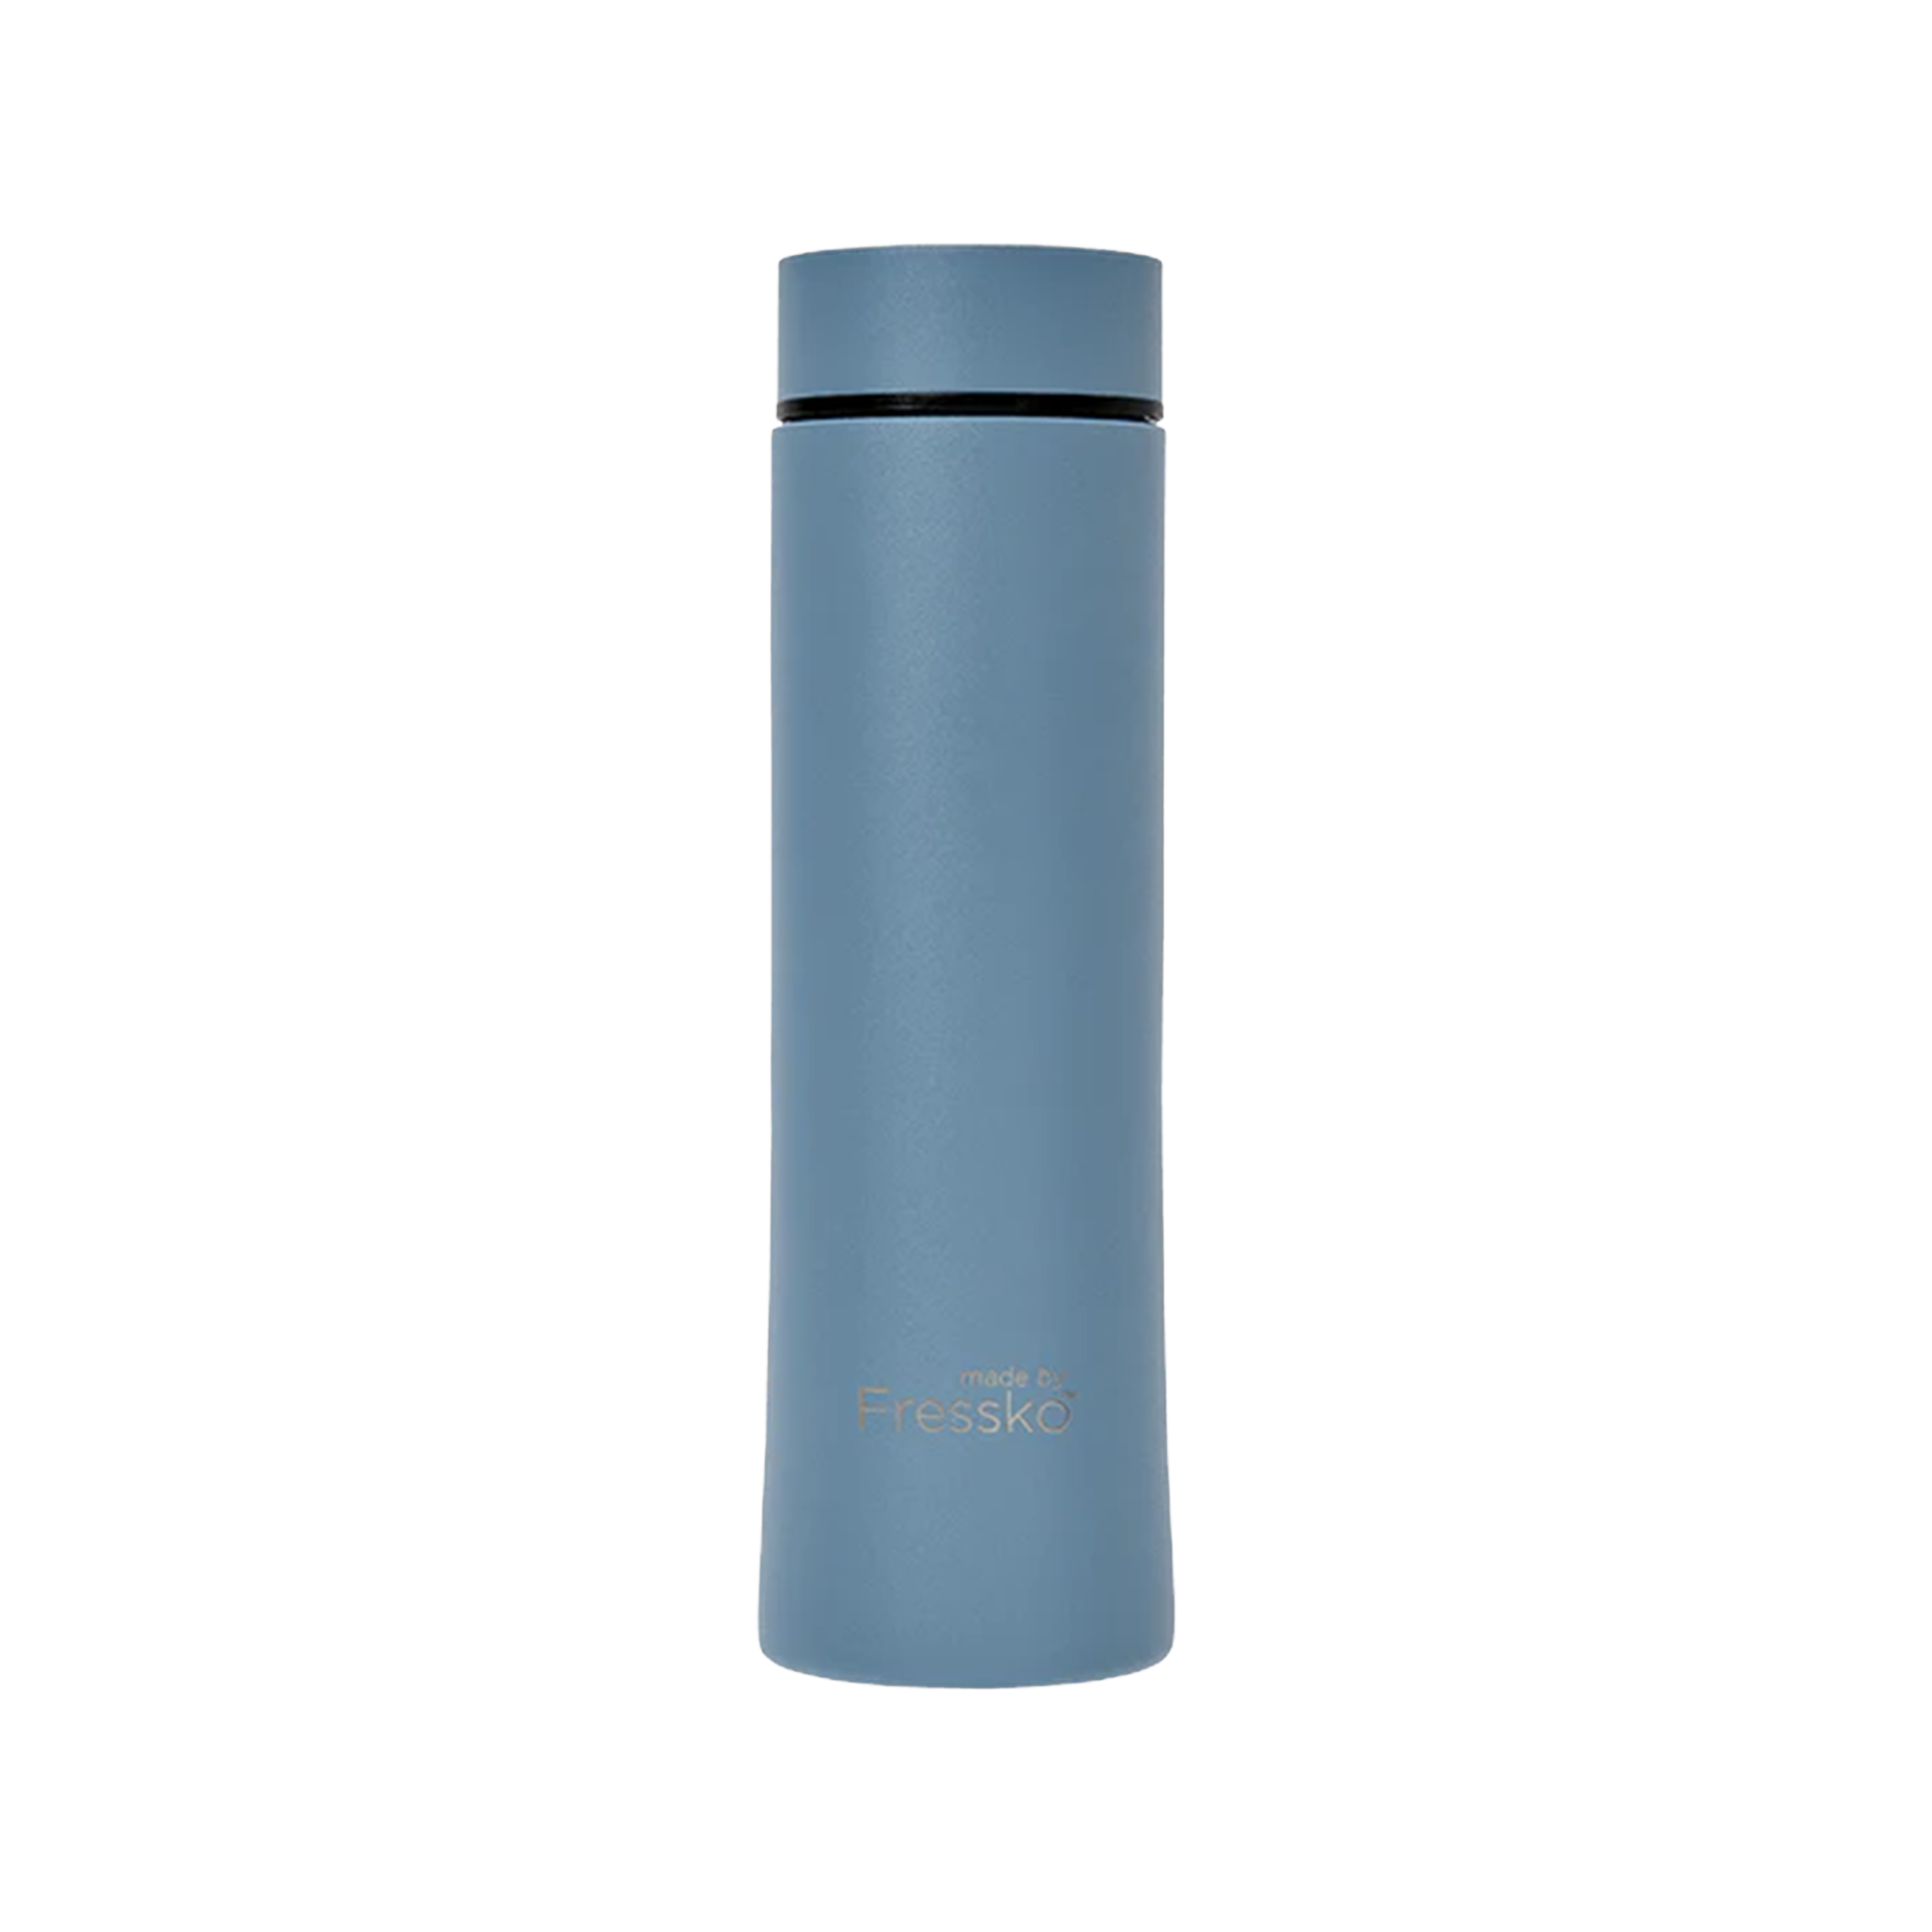 MOVE Insulated Stainless Steel 660ml - River